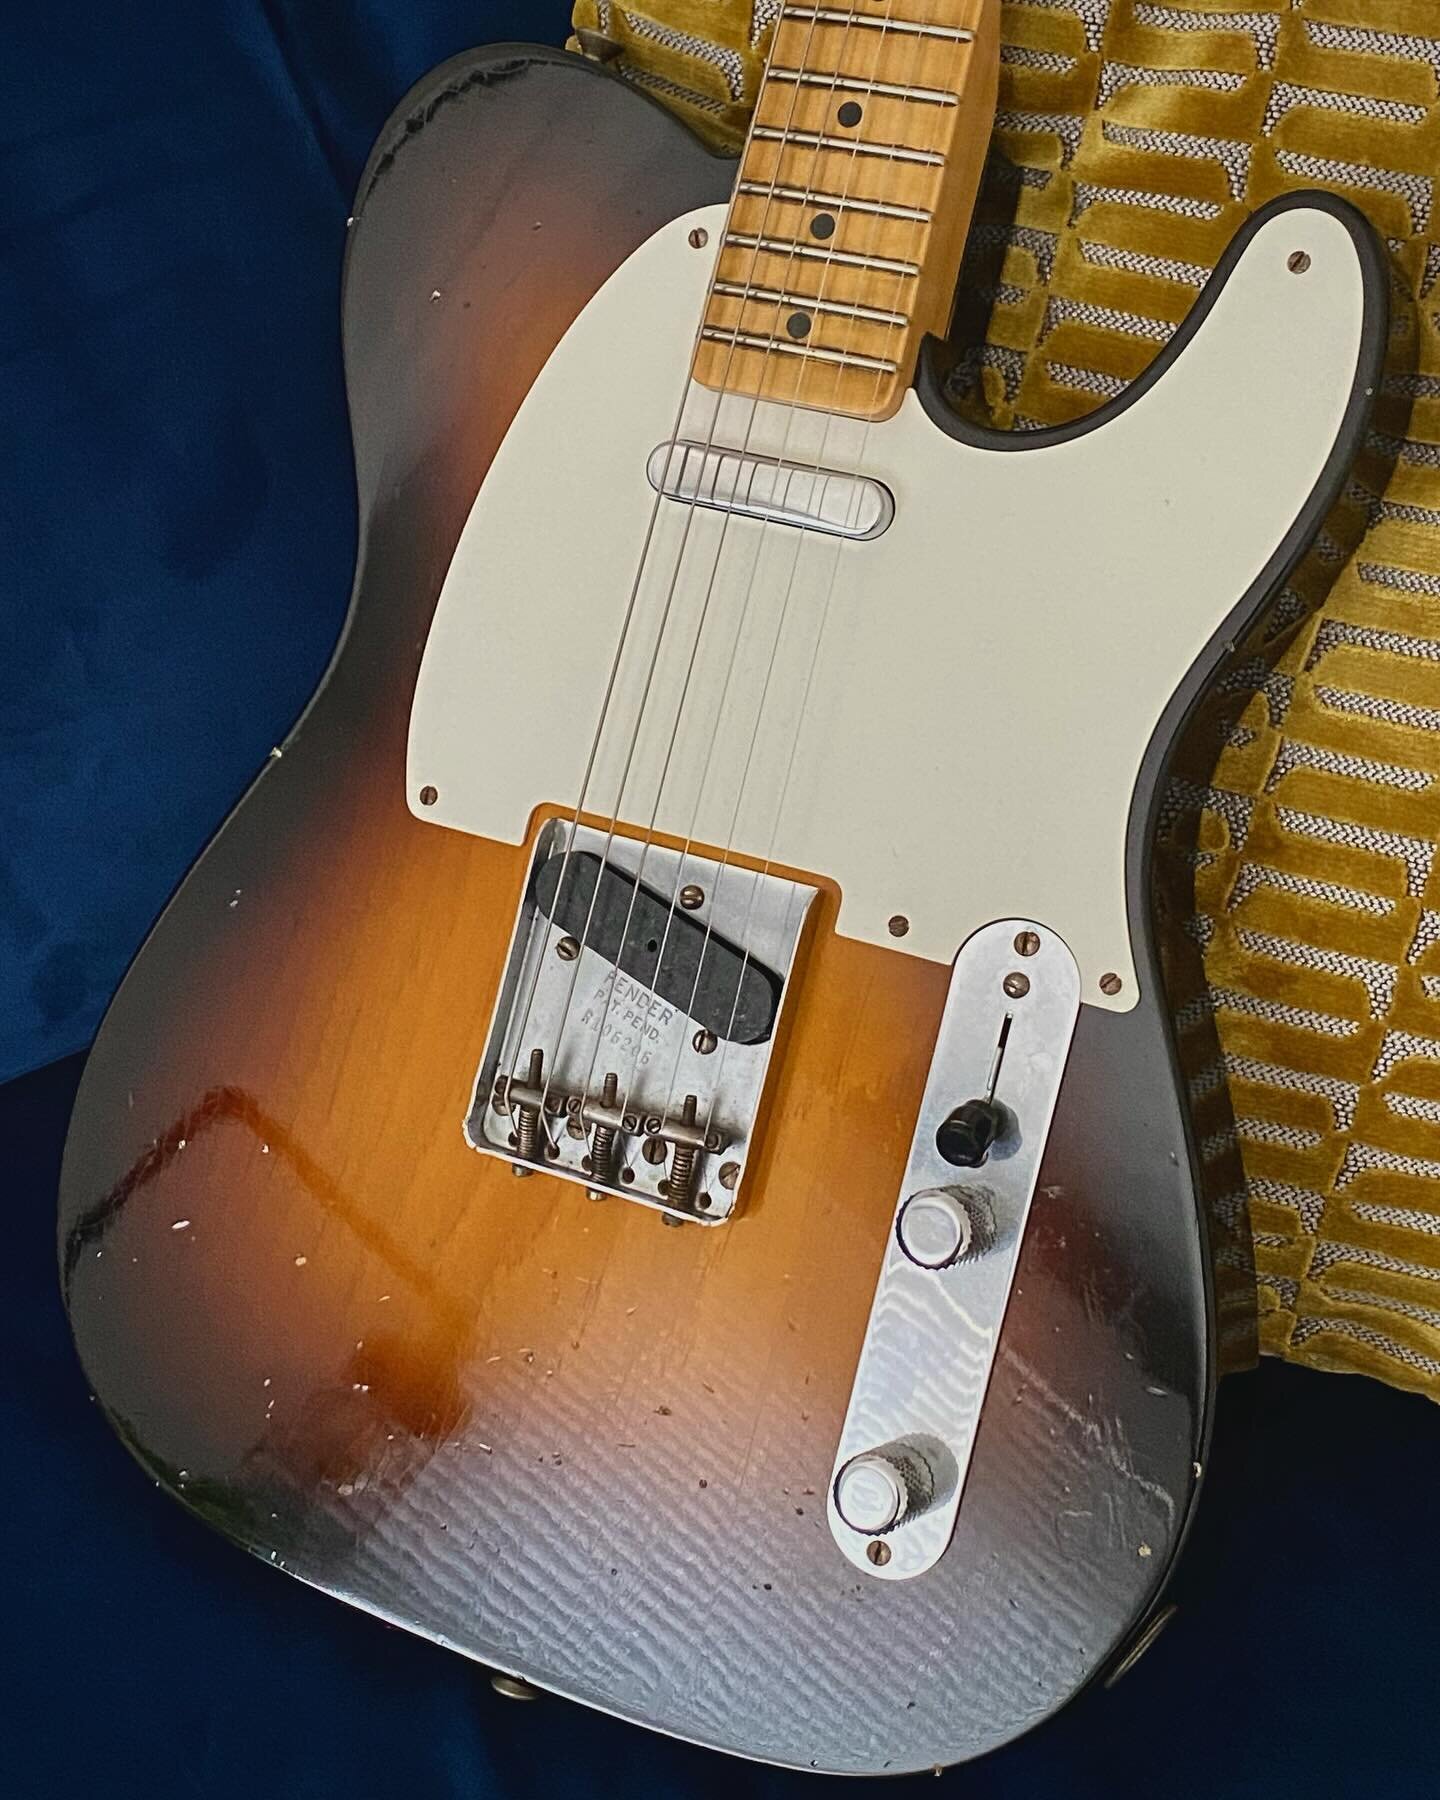 Guitar Of The Week. #1 in an occasional series. I&rsquo;ve been playing this one a fair bit this week and I&rsquo;m blown away at just how good this one is every time I pick it up. It&rsquo;s a limited edition Fender Custom Shop 1950 Esquire reissue.